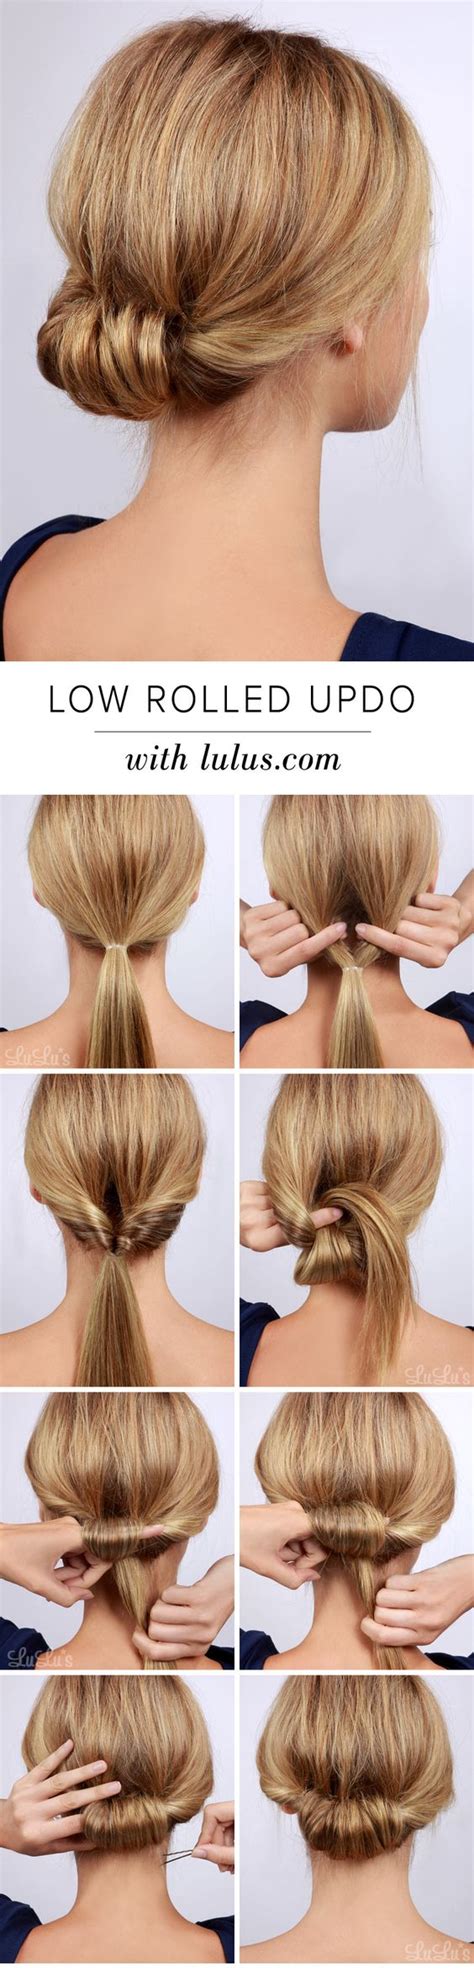 11 Easy Step By Step Updo Tutorials For Beginners Hair Wrap Tutorials